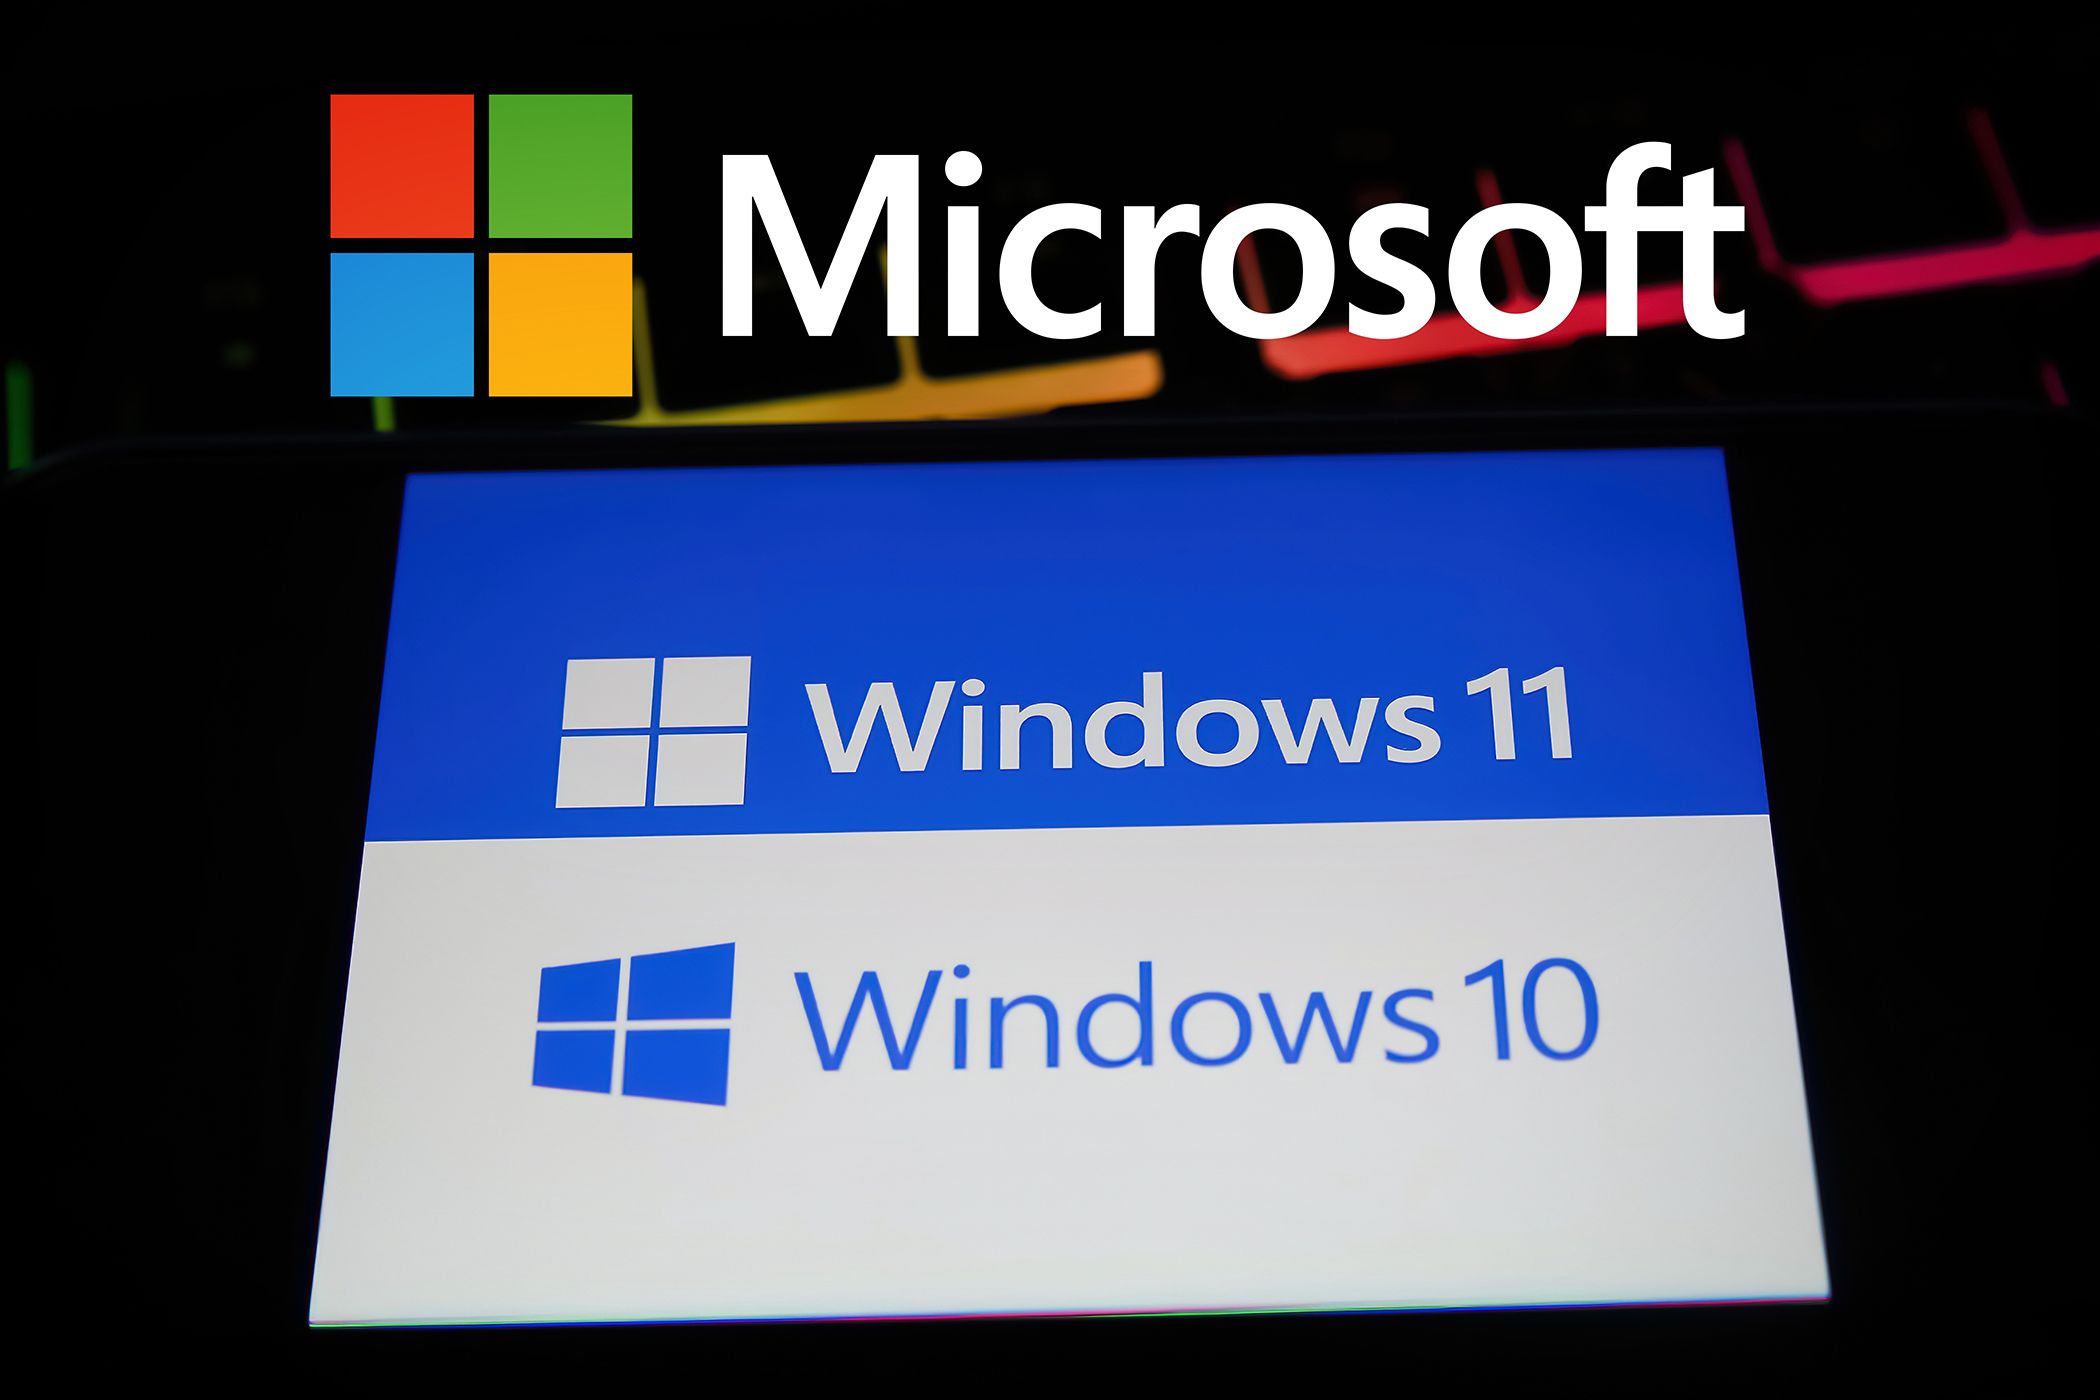 Microsoft logo over a screen with the Windows 11 and Windows 10 logos highlighting different versions of the operating system.